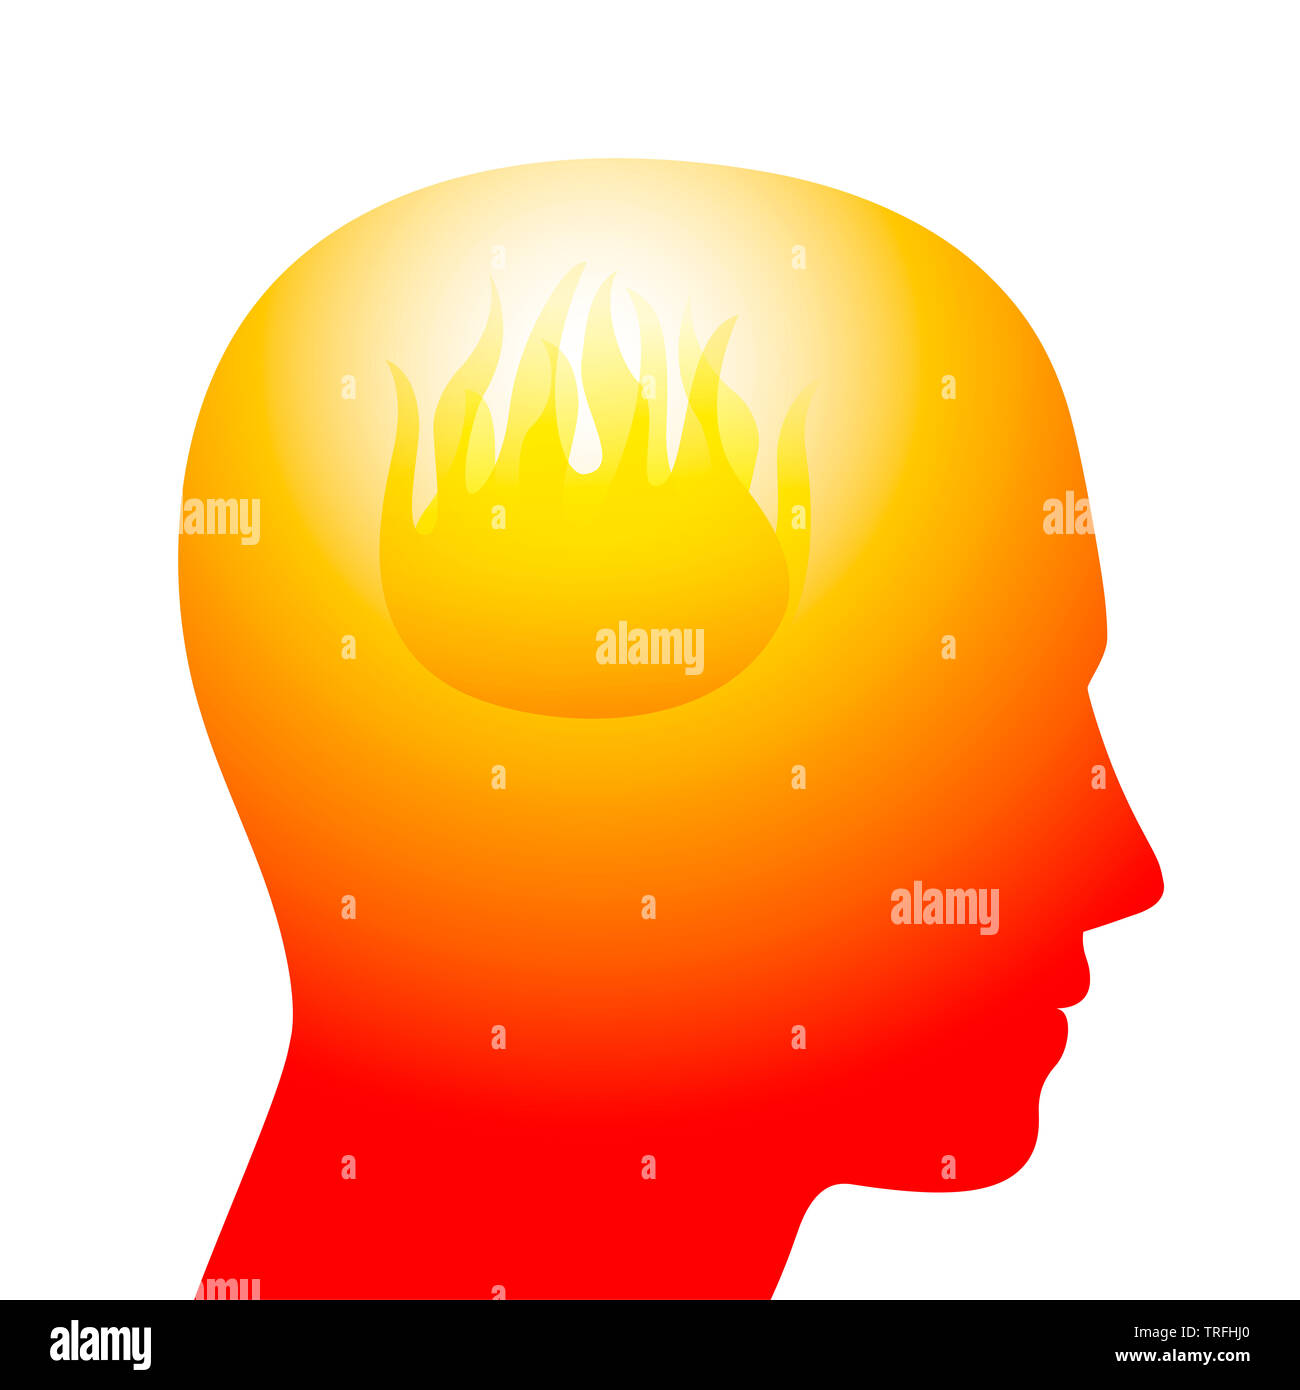 Hothead, firebrand, hotspur. Symbolized with flames in an orange and red head of a young person. Stock Photo